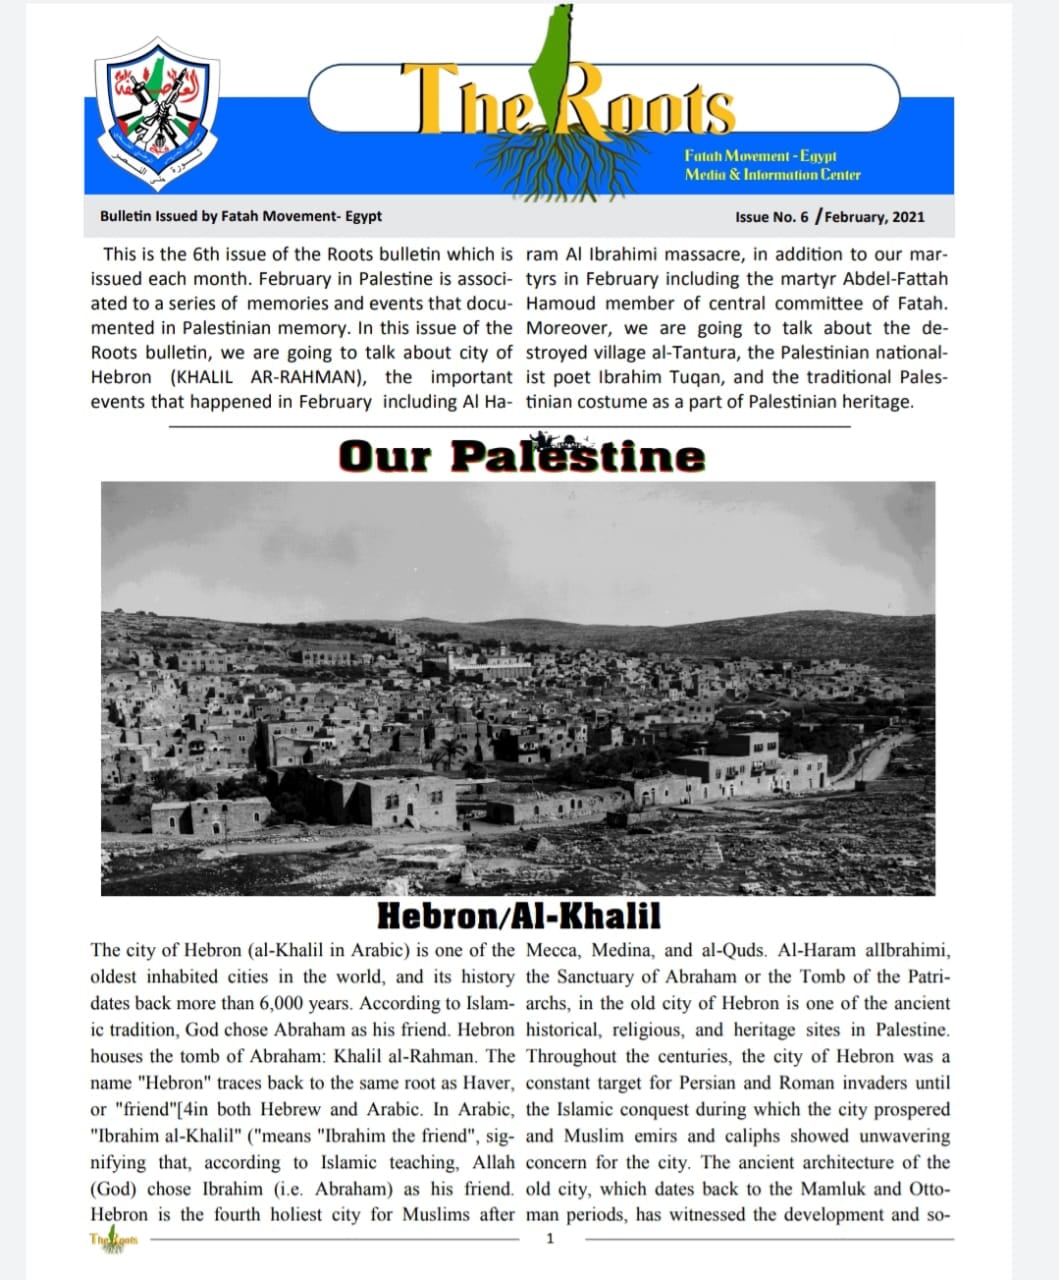 The Roots Bulletin (Issue No.6)